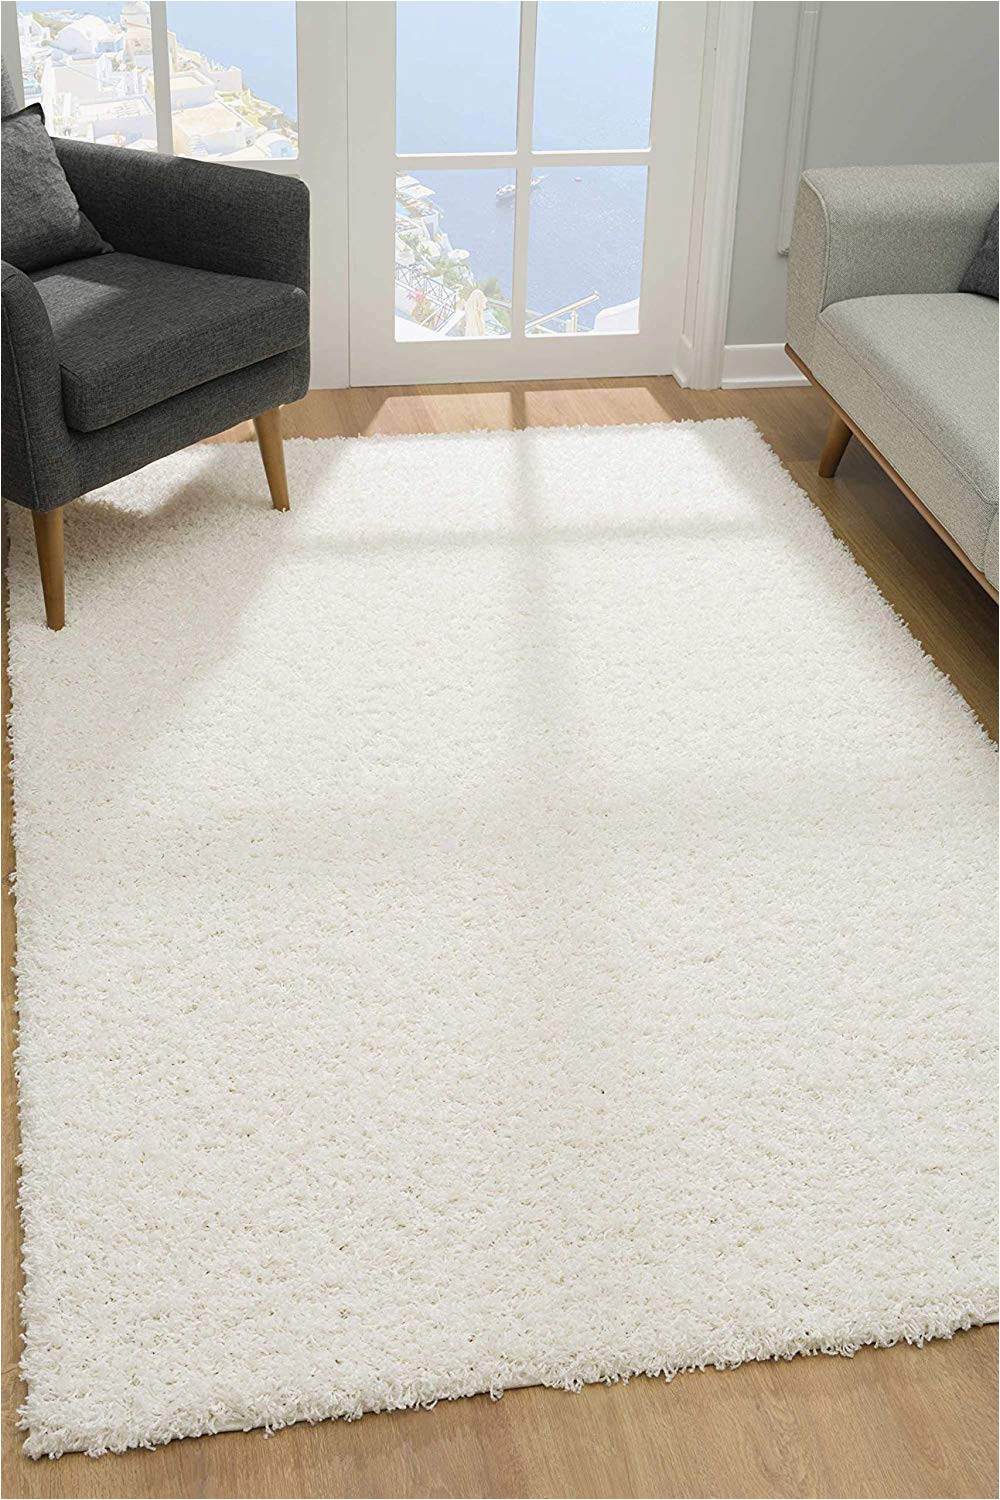 Solid Color area Rugs 9×12 Malibu 9×12 Modern solid Shaggy area Rug In White Walmart